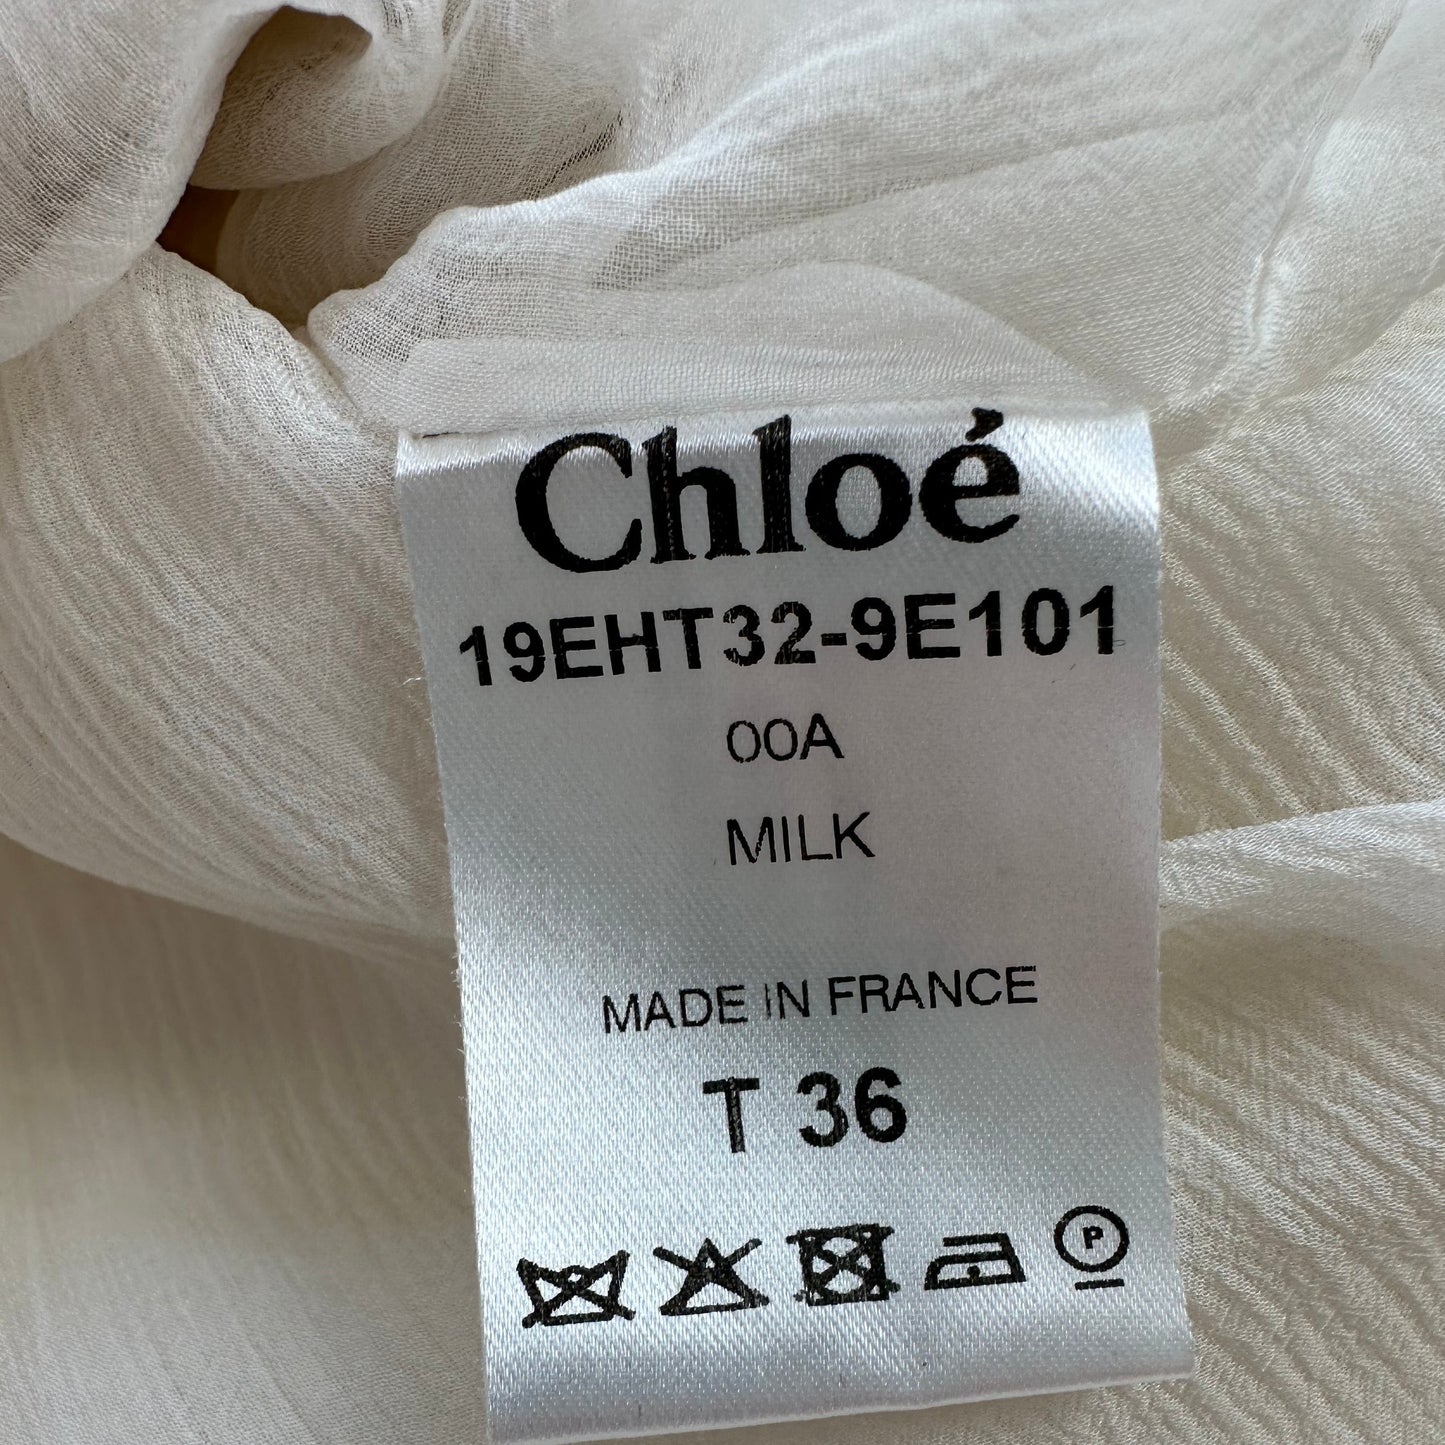 Chloé 2019 Scoop Neck Lace Top in Milk Size 36